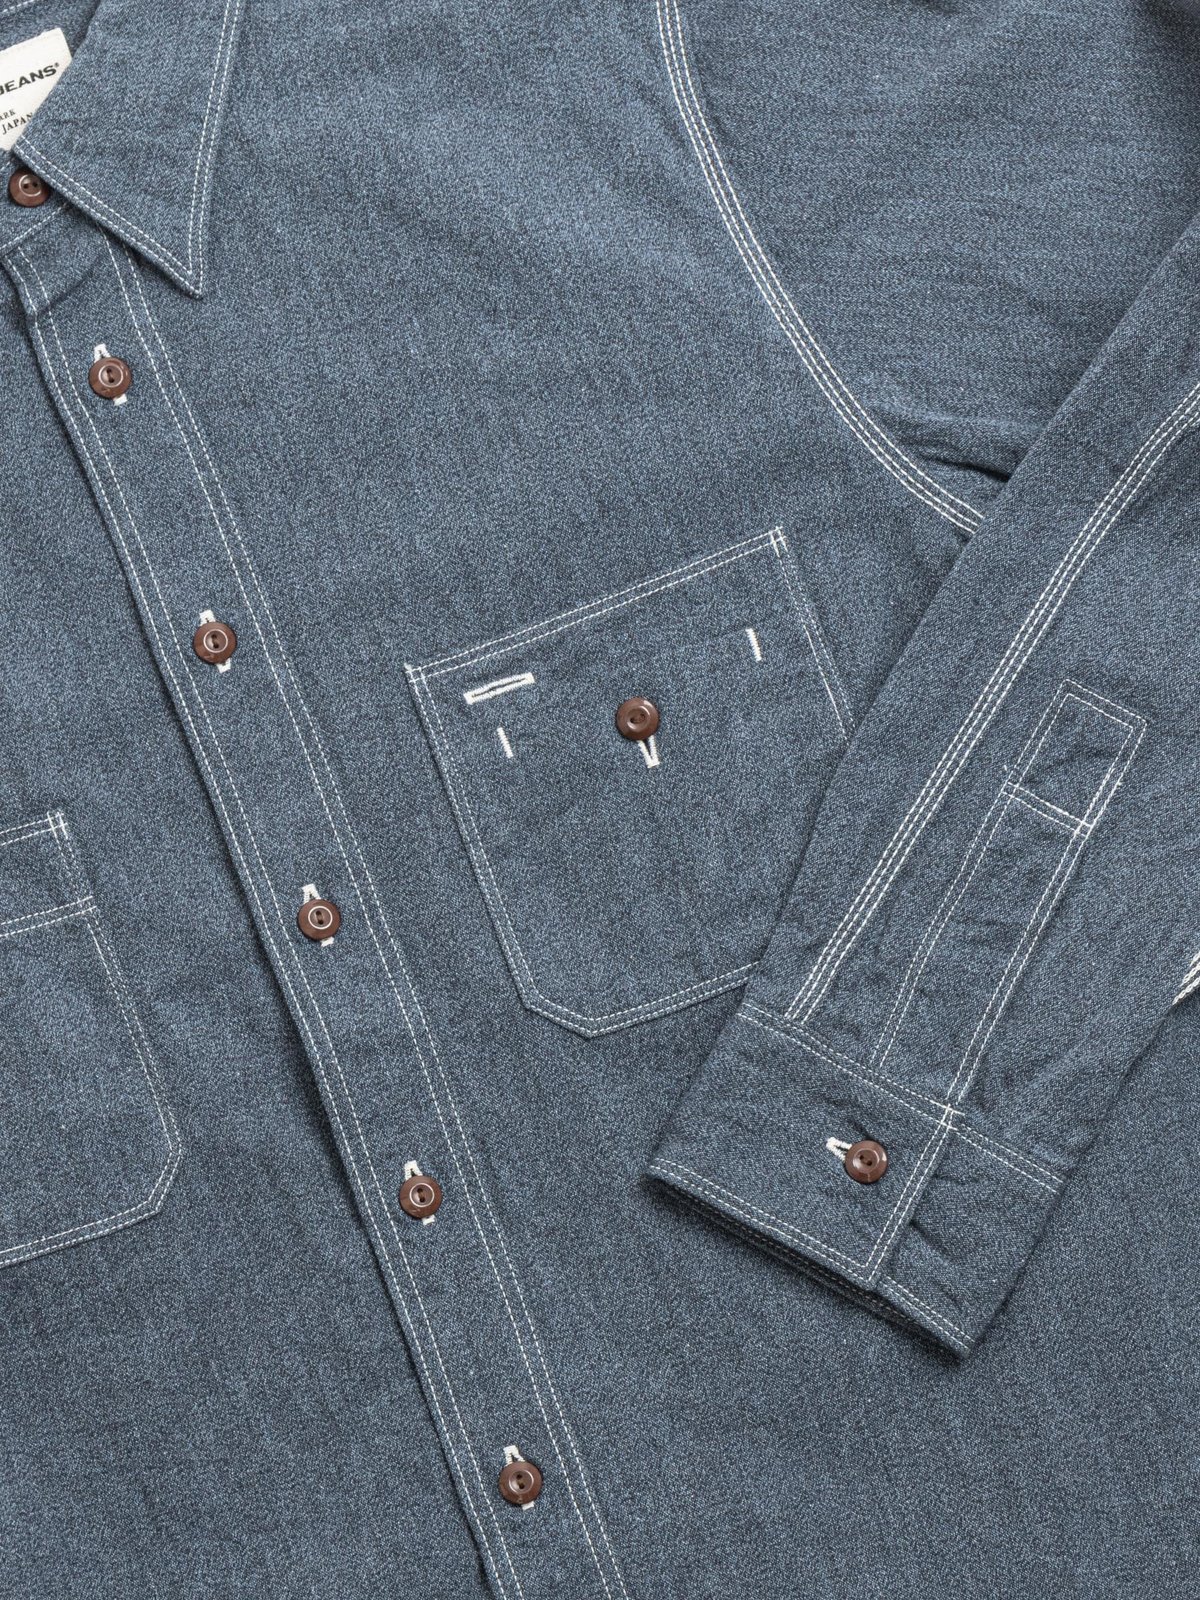 SJCBS23 TWISTED HEATHER SELVEDGE CHAMBRAY NAVY - Image 3